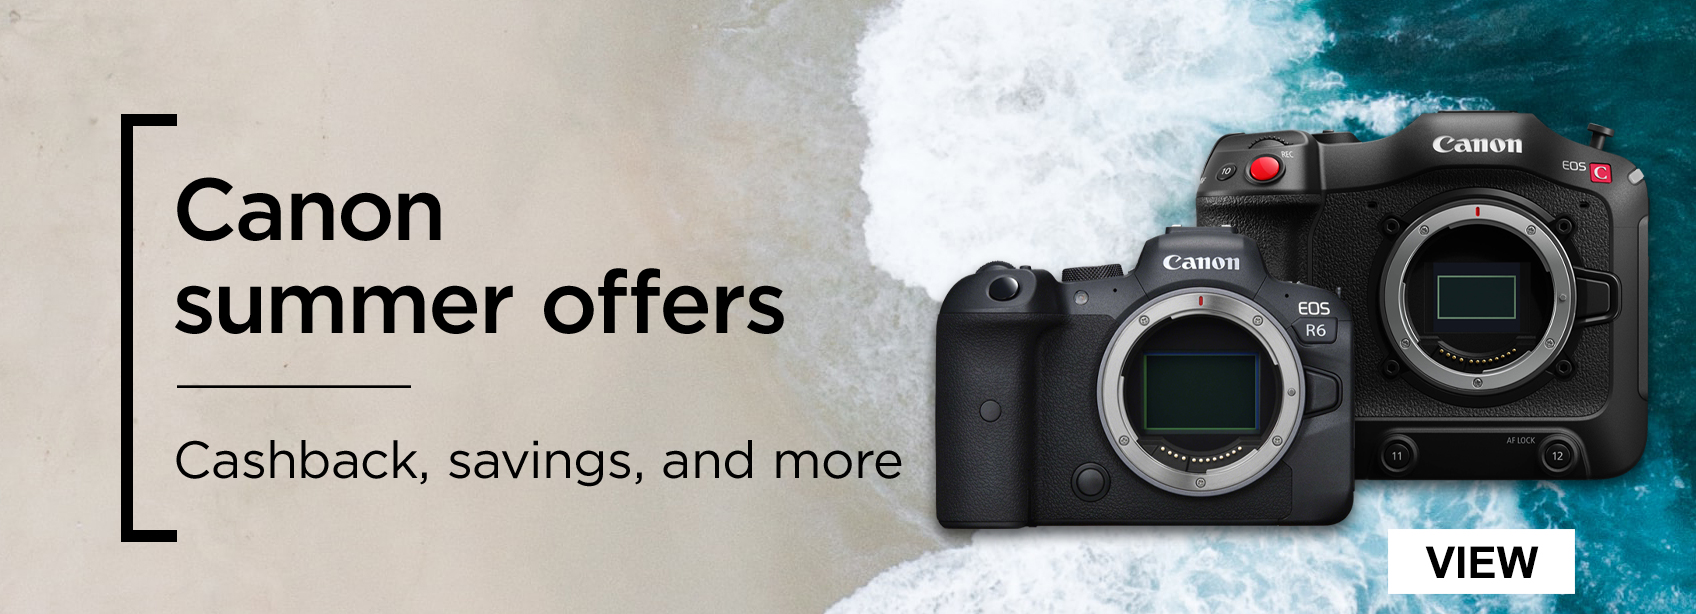 Canon summer offers - Cashbacks, saving and more